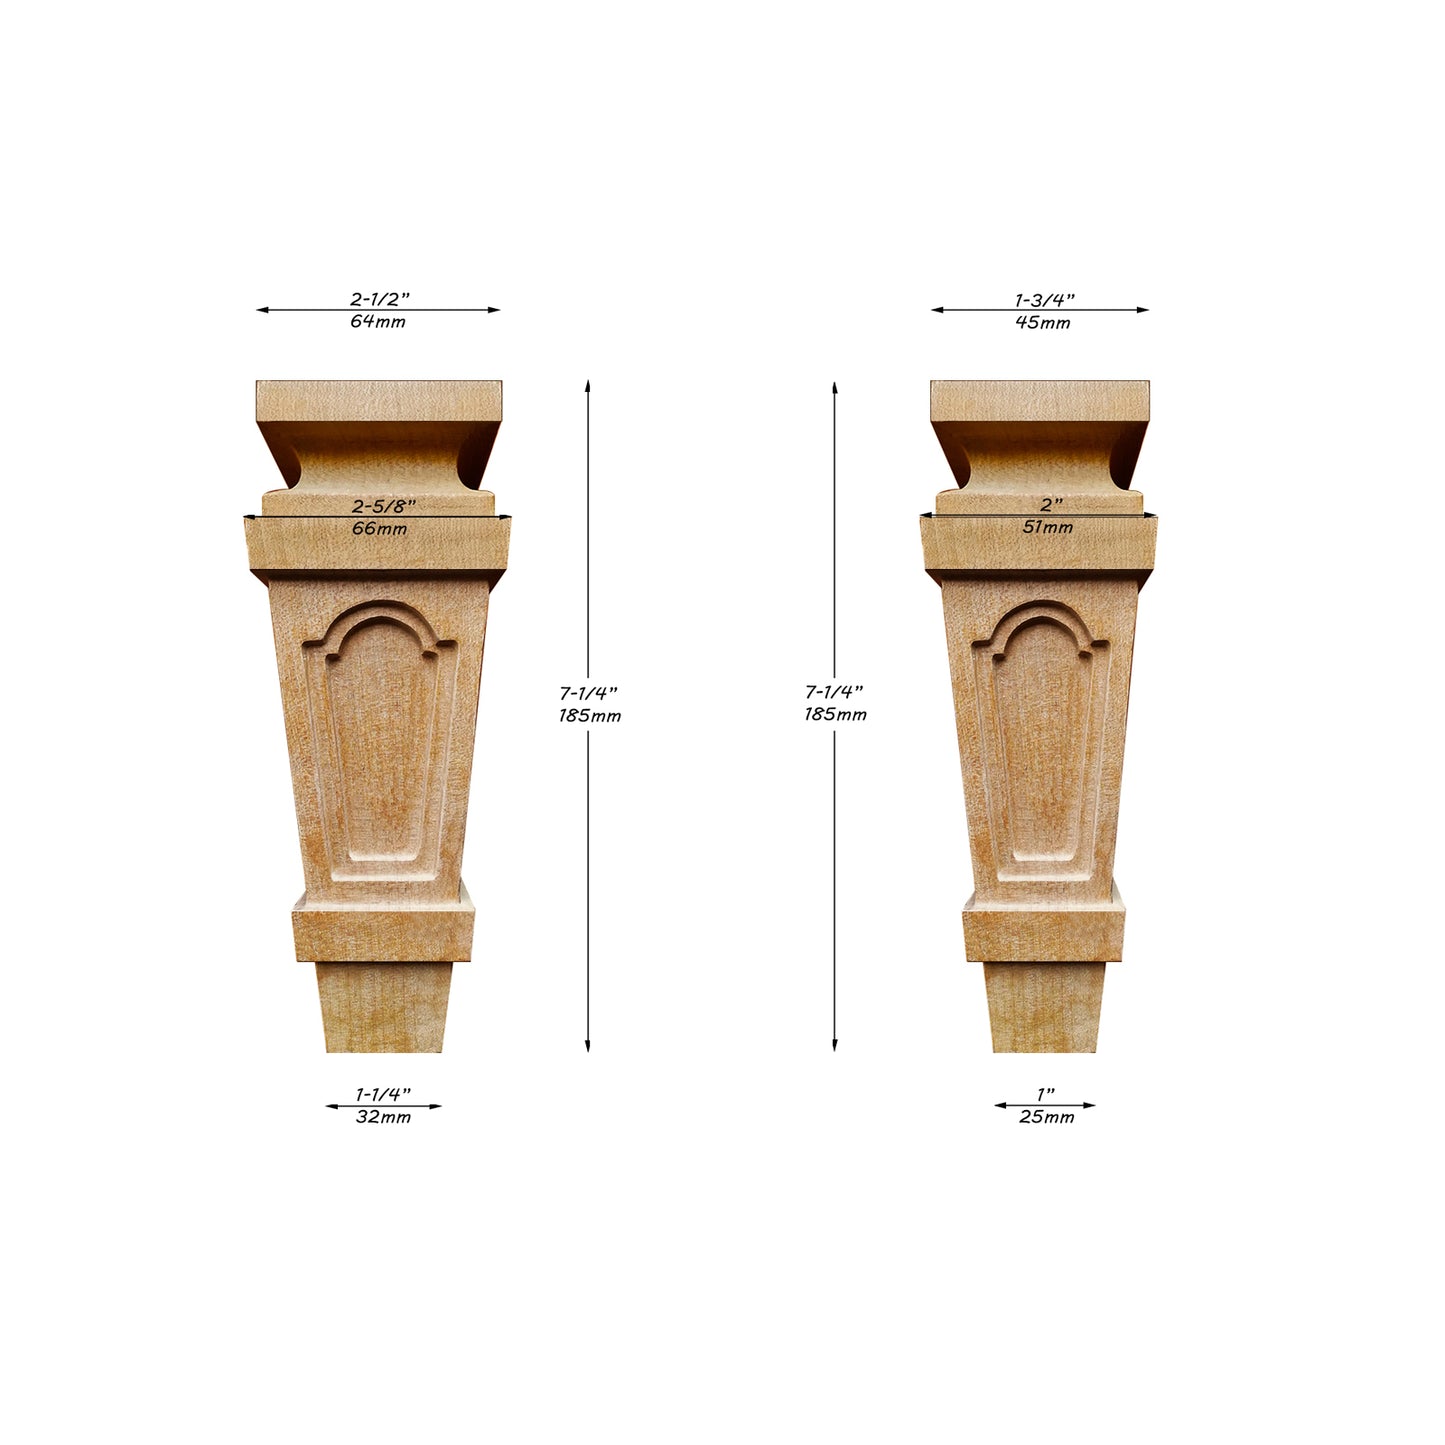 PAIR of Quality Gothic Style 7-1/4"High Wood Furniture Cabinet Legs Bun Feet